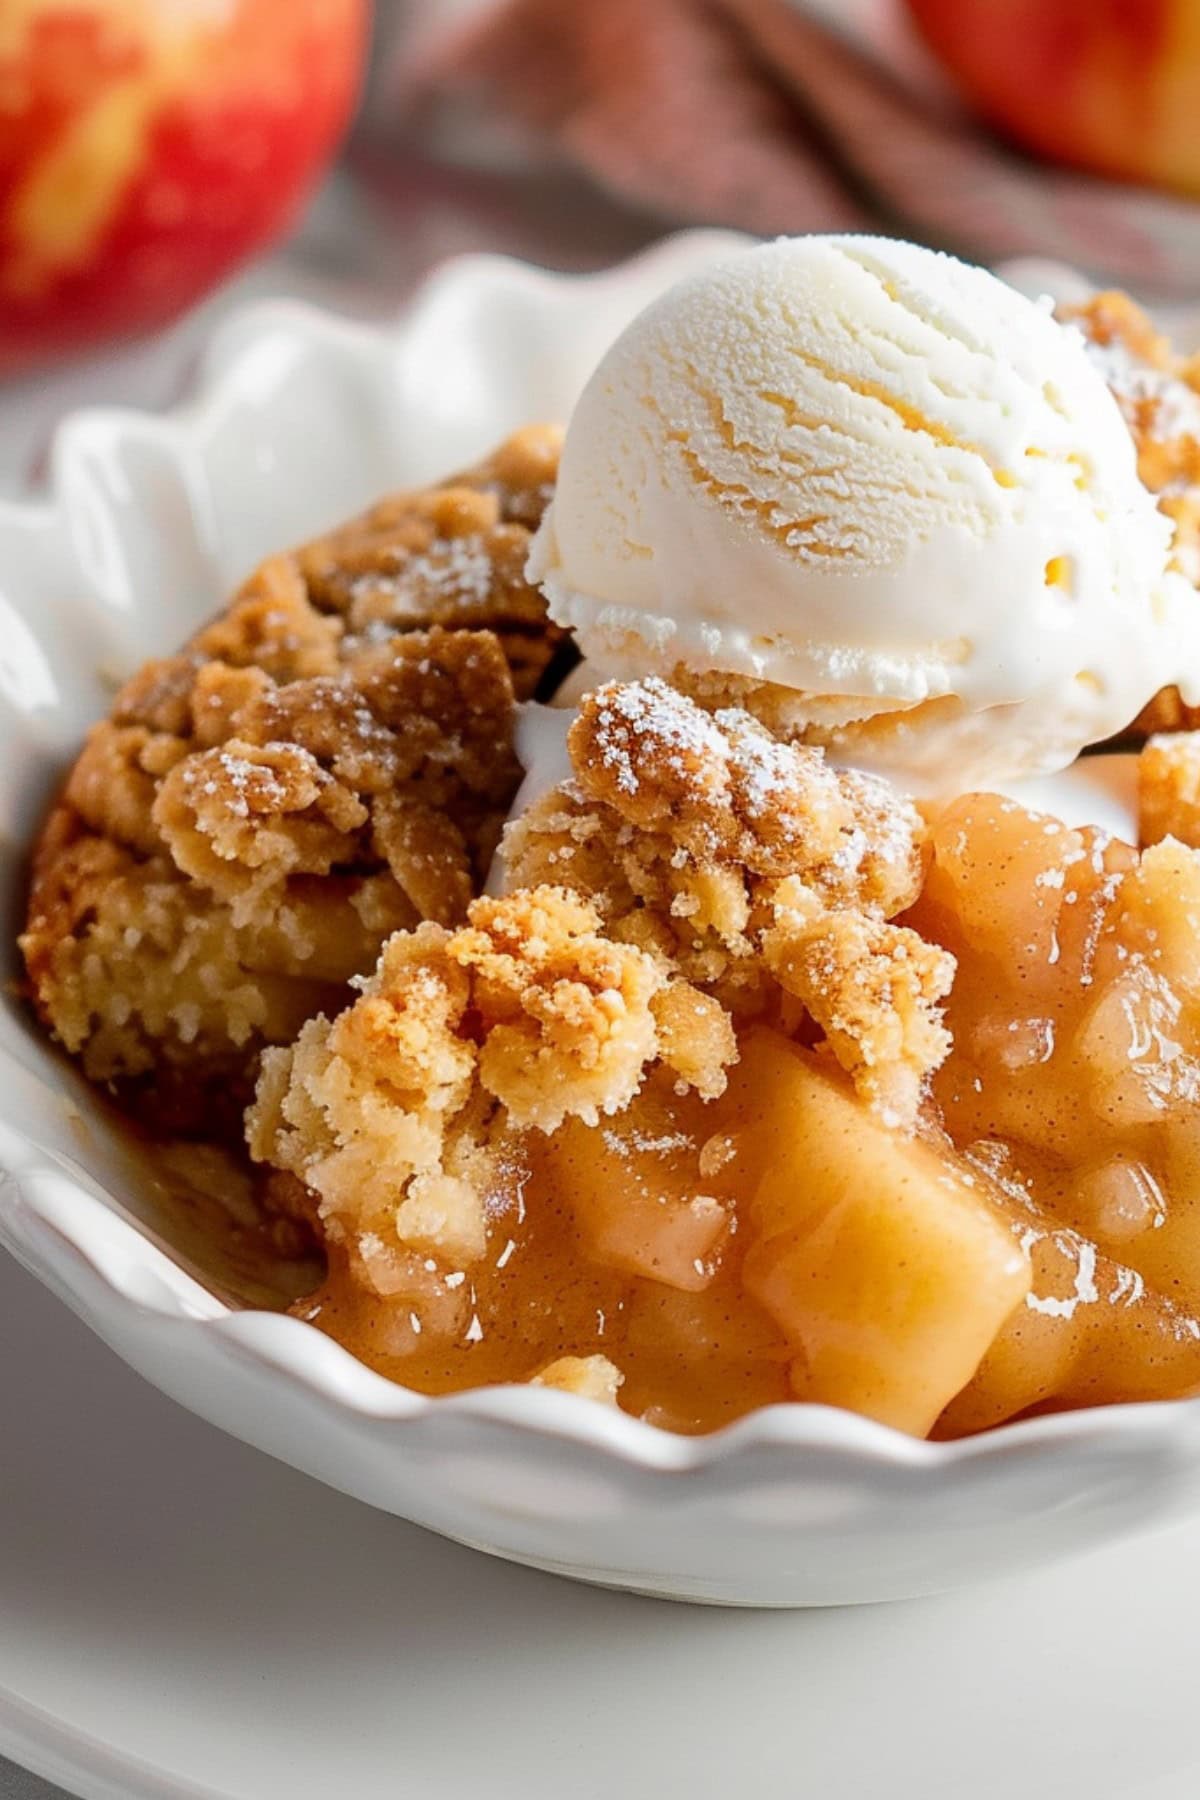 A classic apple cobbler with a dollop of vanilla ice cream melting on top, creating a delightful contrast of warm and cold.